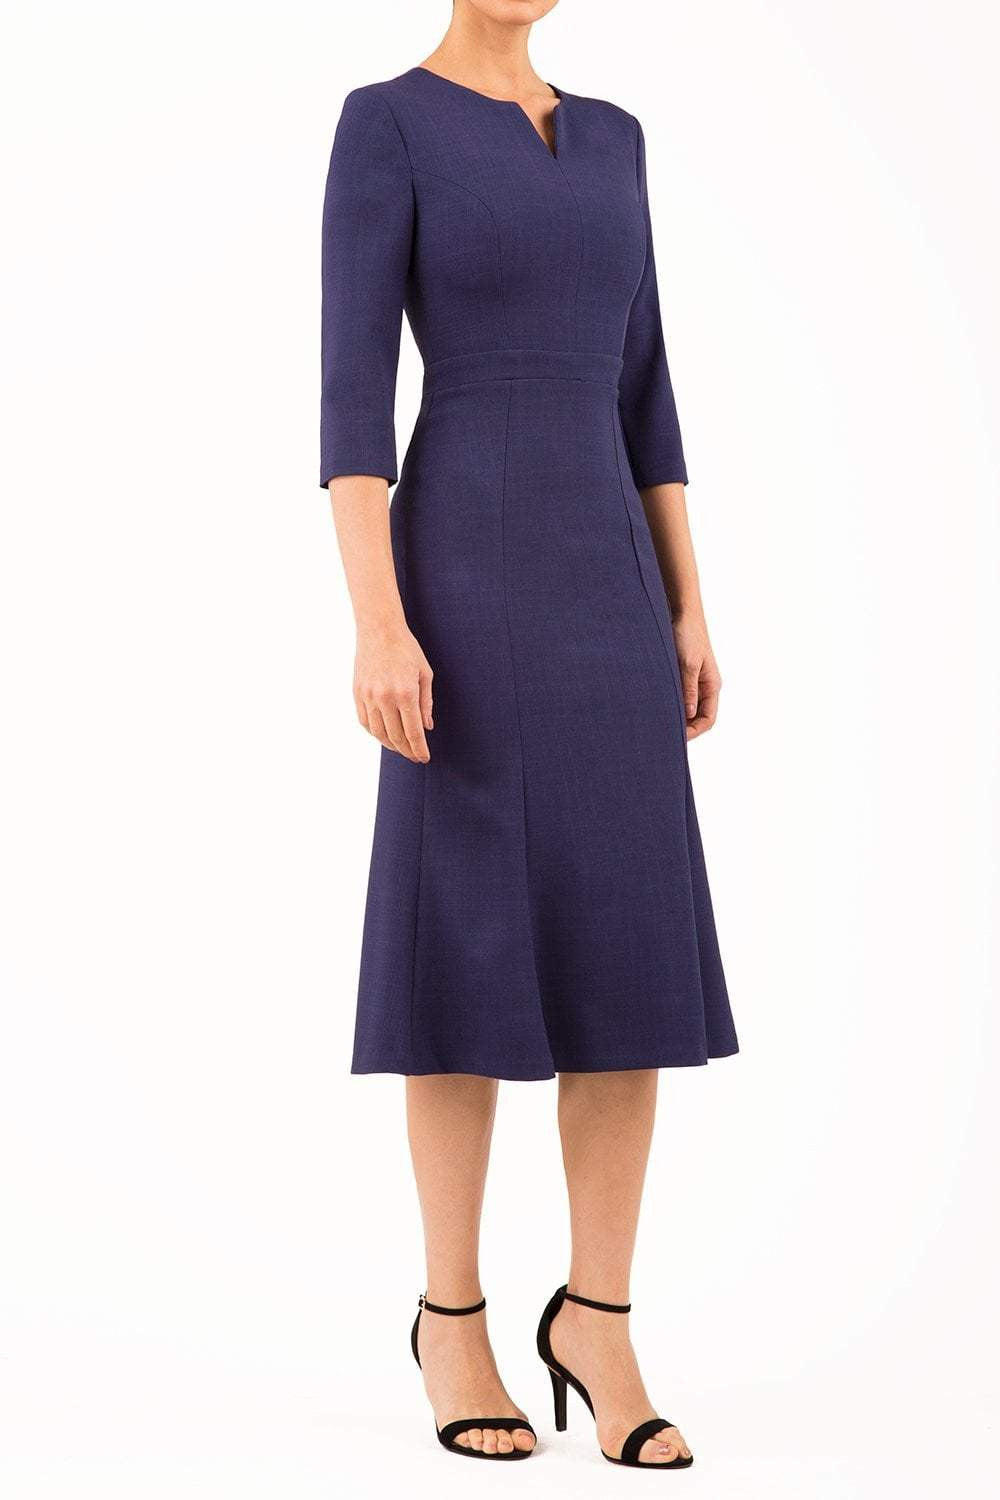 blonde model is wearing diva catwalk senne midaxi sleeved dress with fishtail and rounded neckline with a slit in the middle in navy front